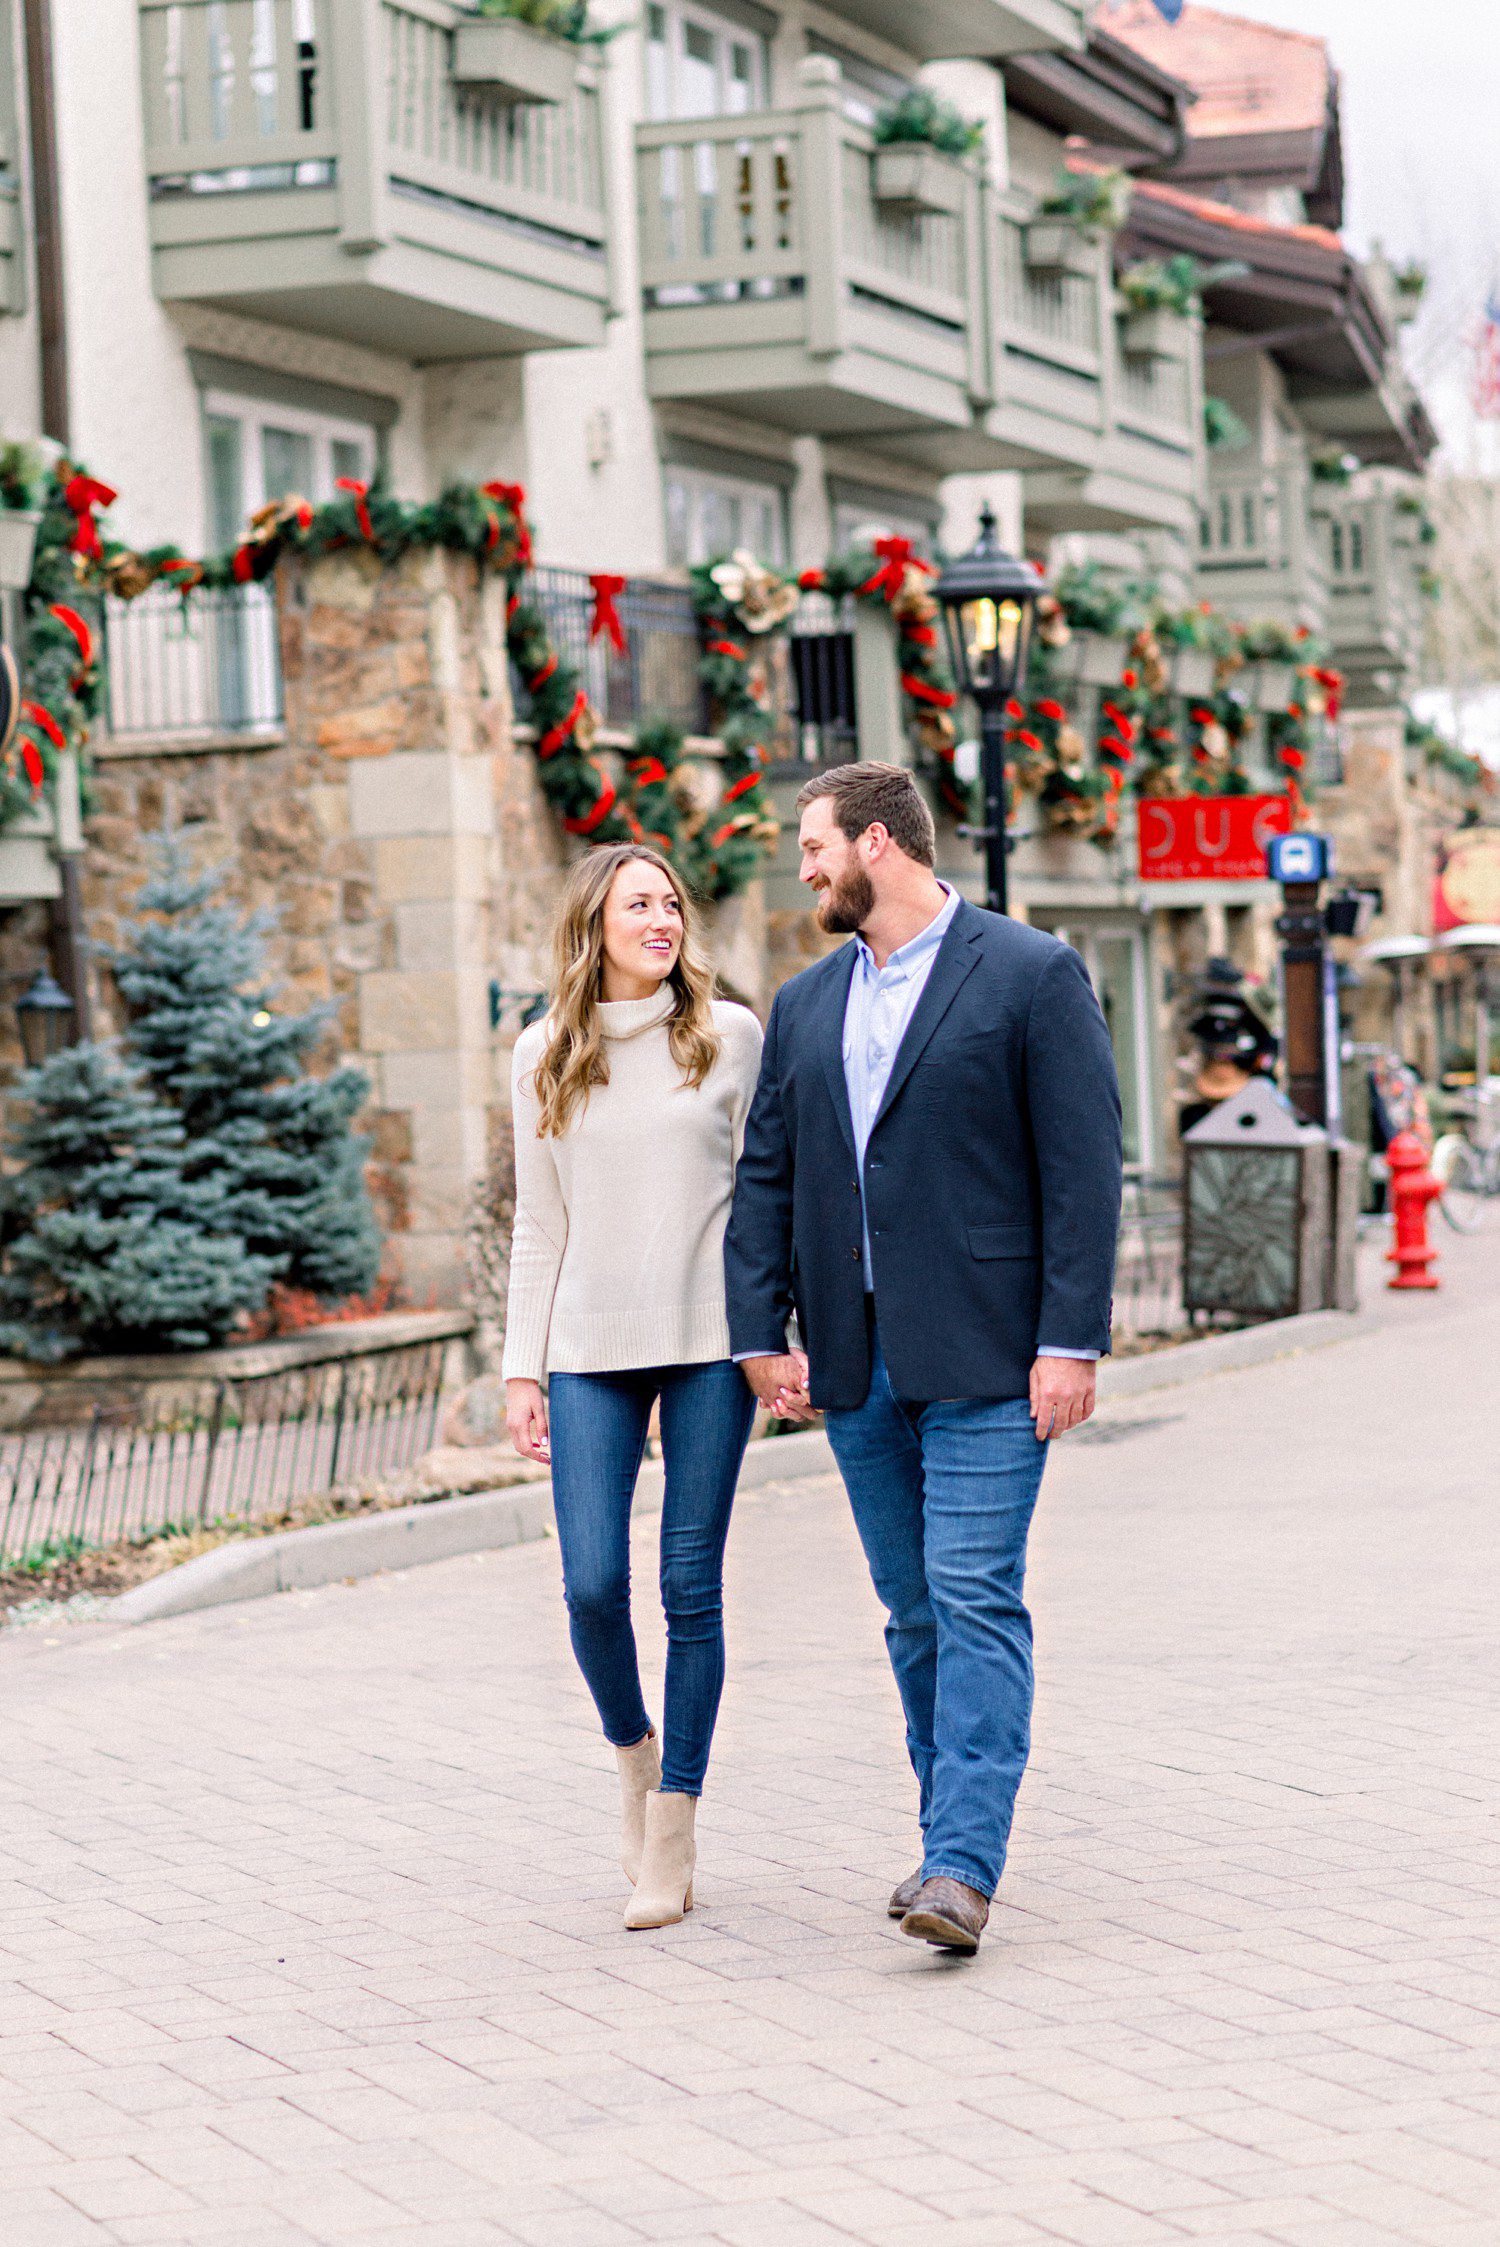 Couple walking for Vail Village engagement session in winter